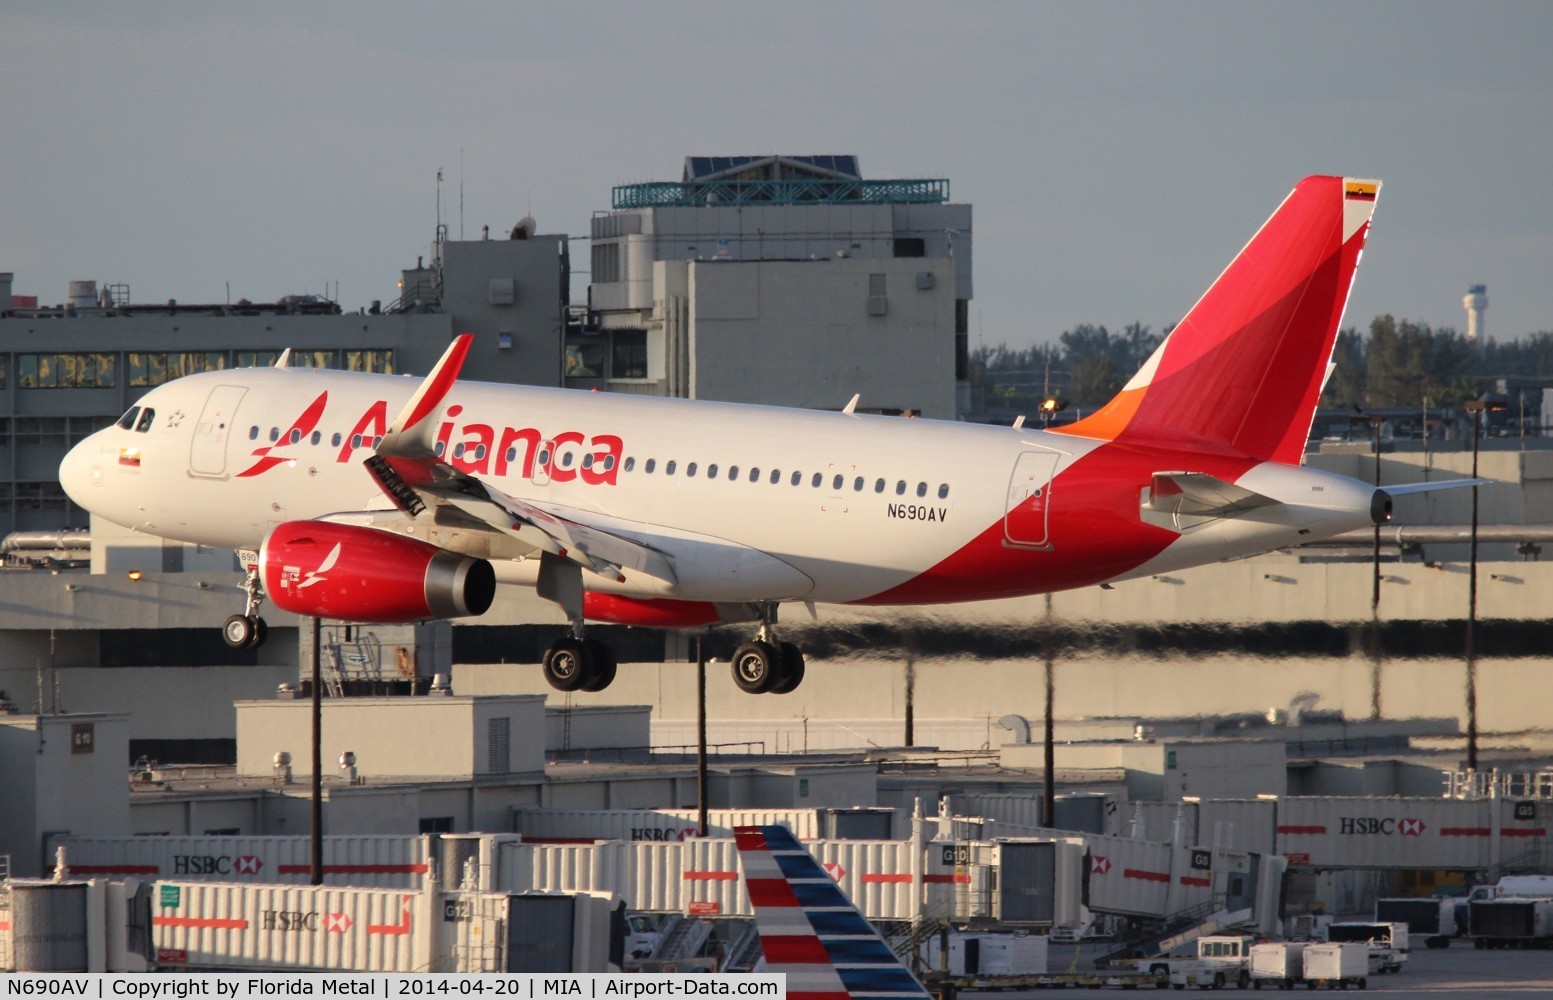 N690AV, 2014 Airbus A319-132 C/N 5944, Brand new Avianca A319 with 